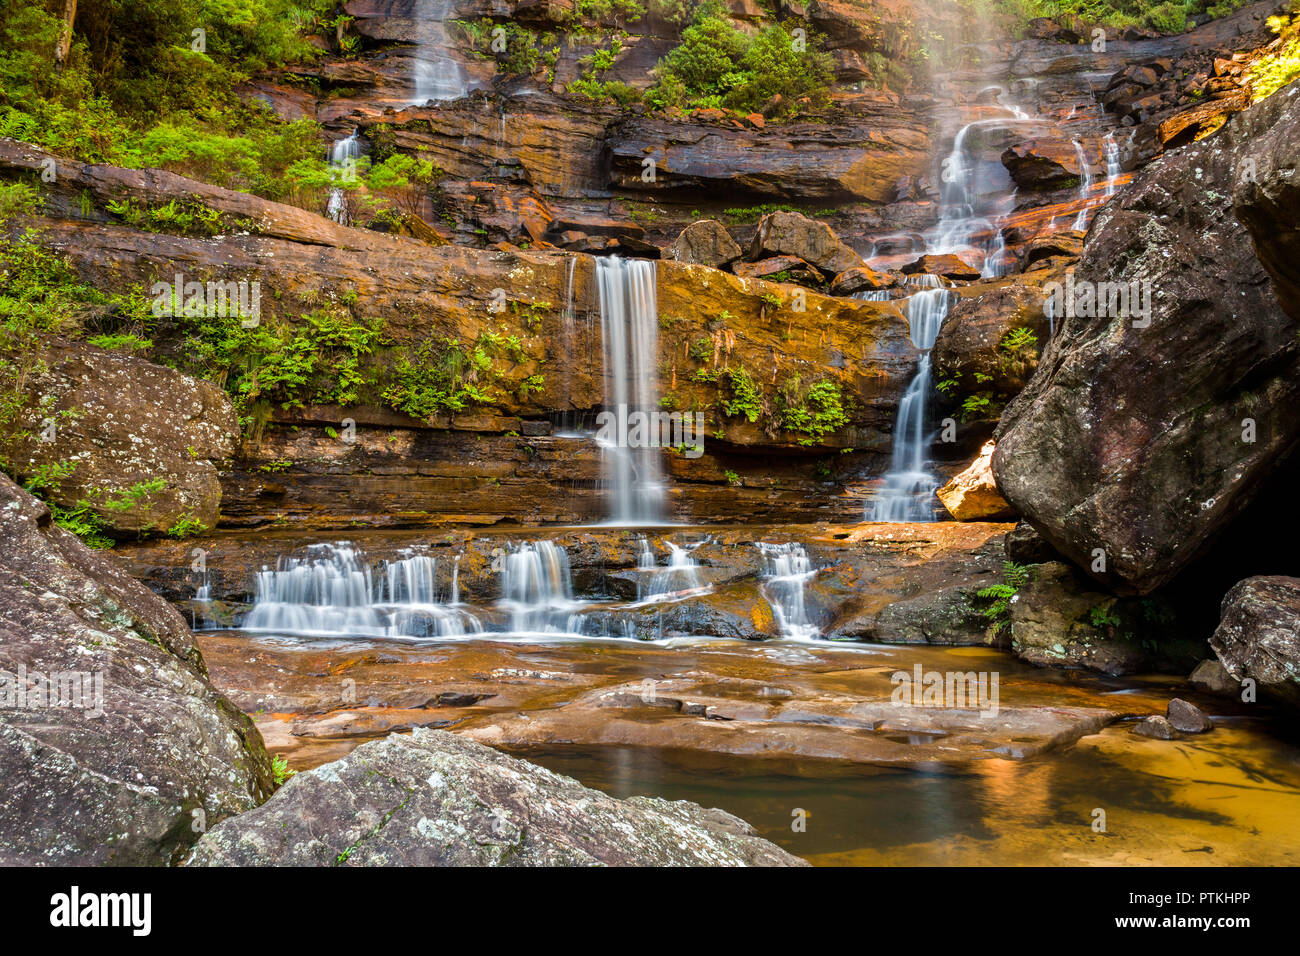 Bottom cascades of Wentworth Falls, Blue Mountain National Park, New South Wales, NSW, Australia Stock Photo